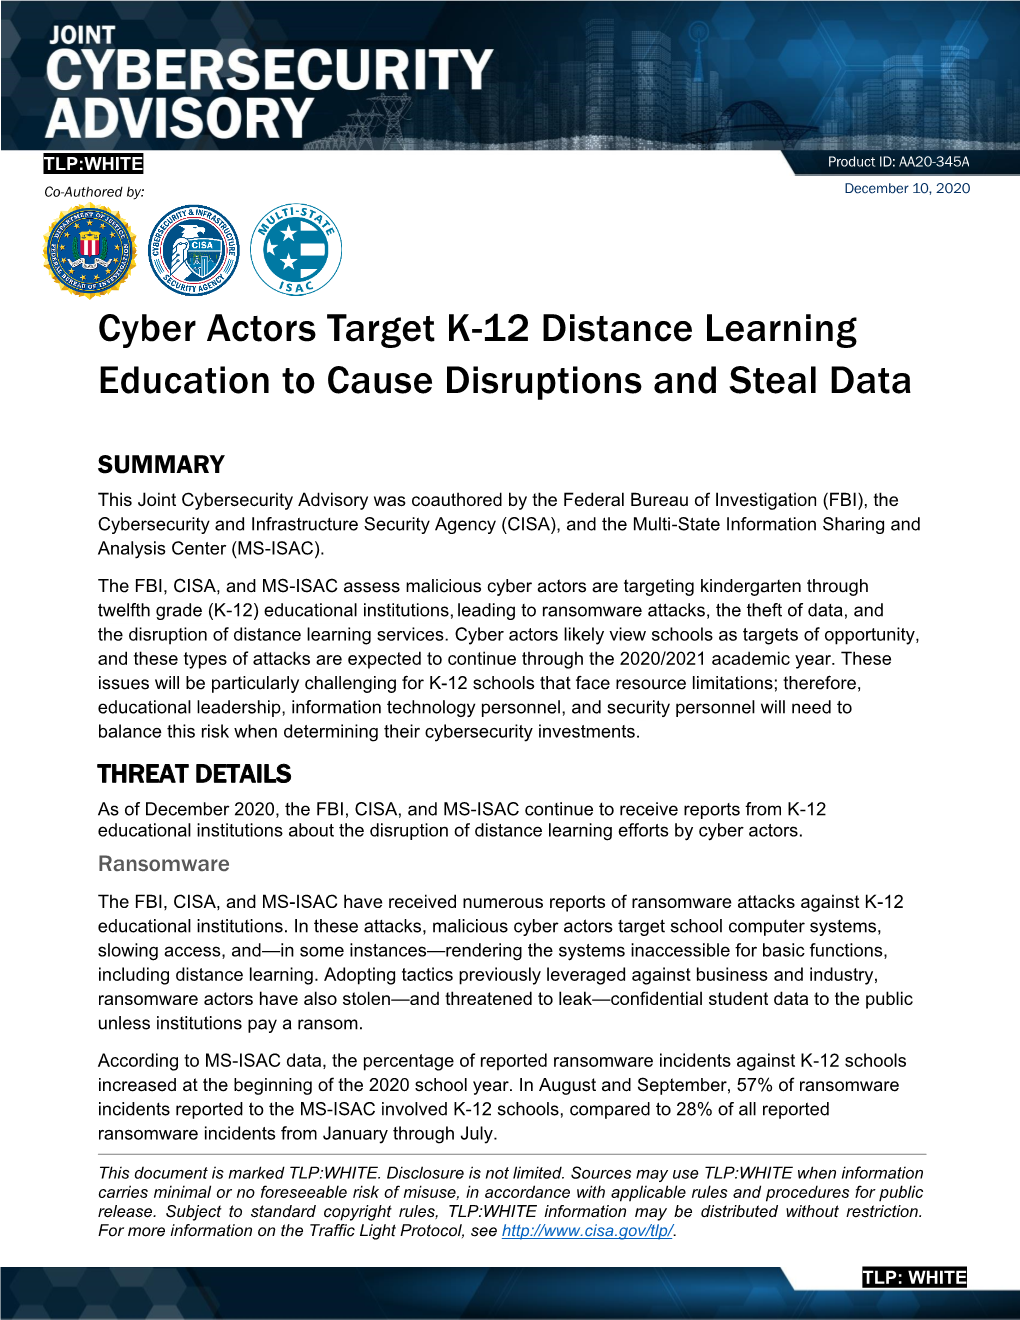 Cyber Actors Target K-12 Distance Learning Education to Cause Disruptions and Steal Data